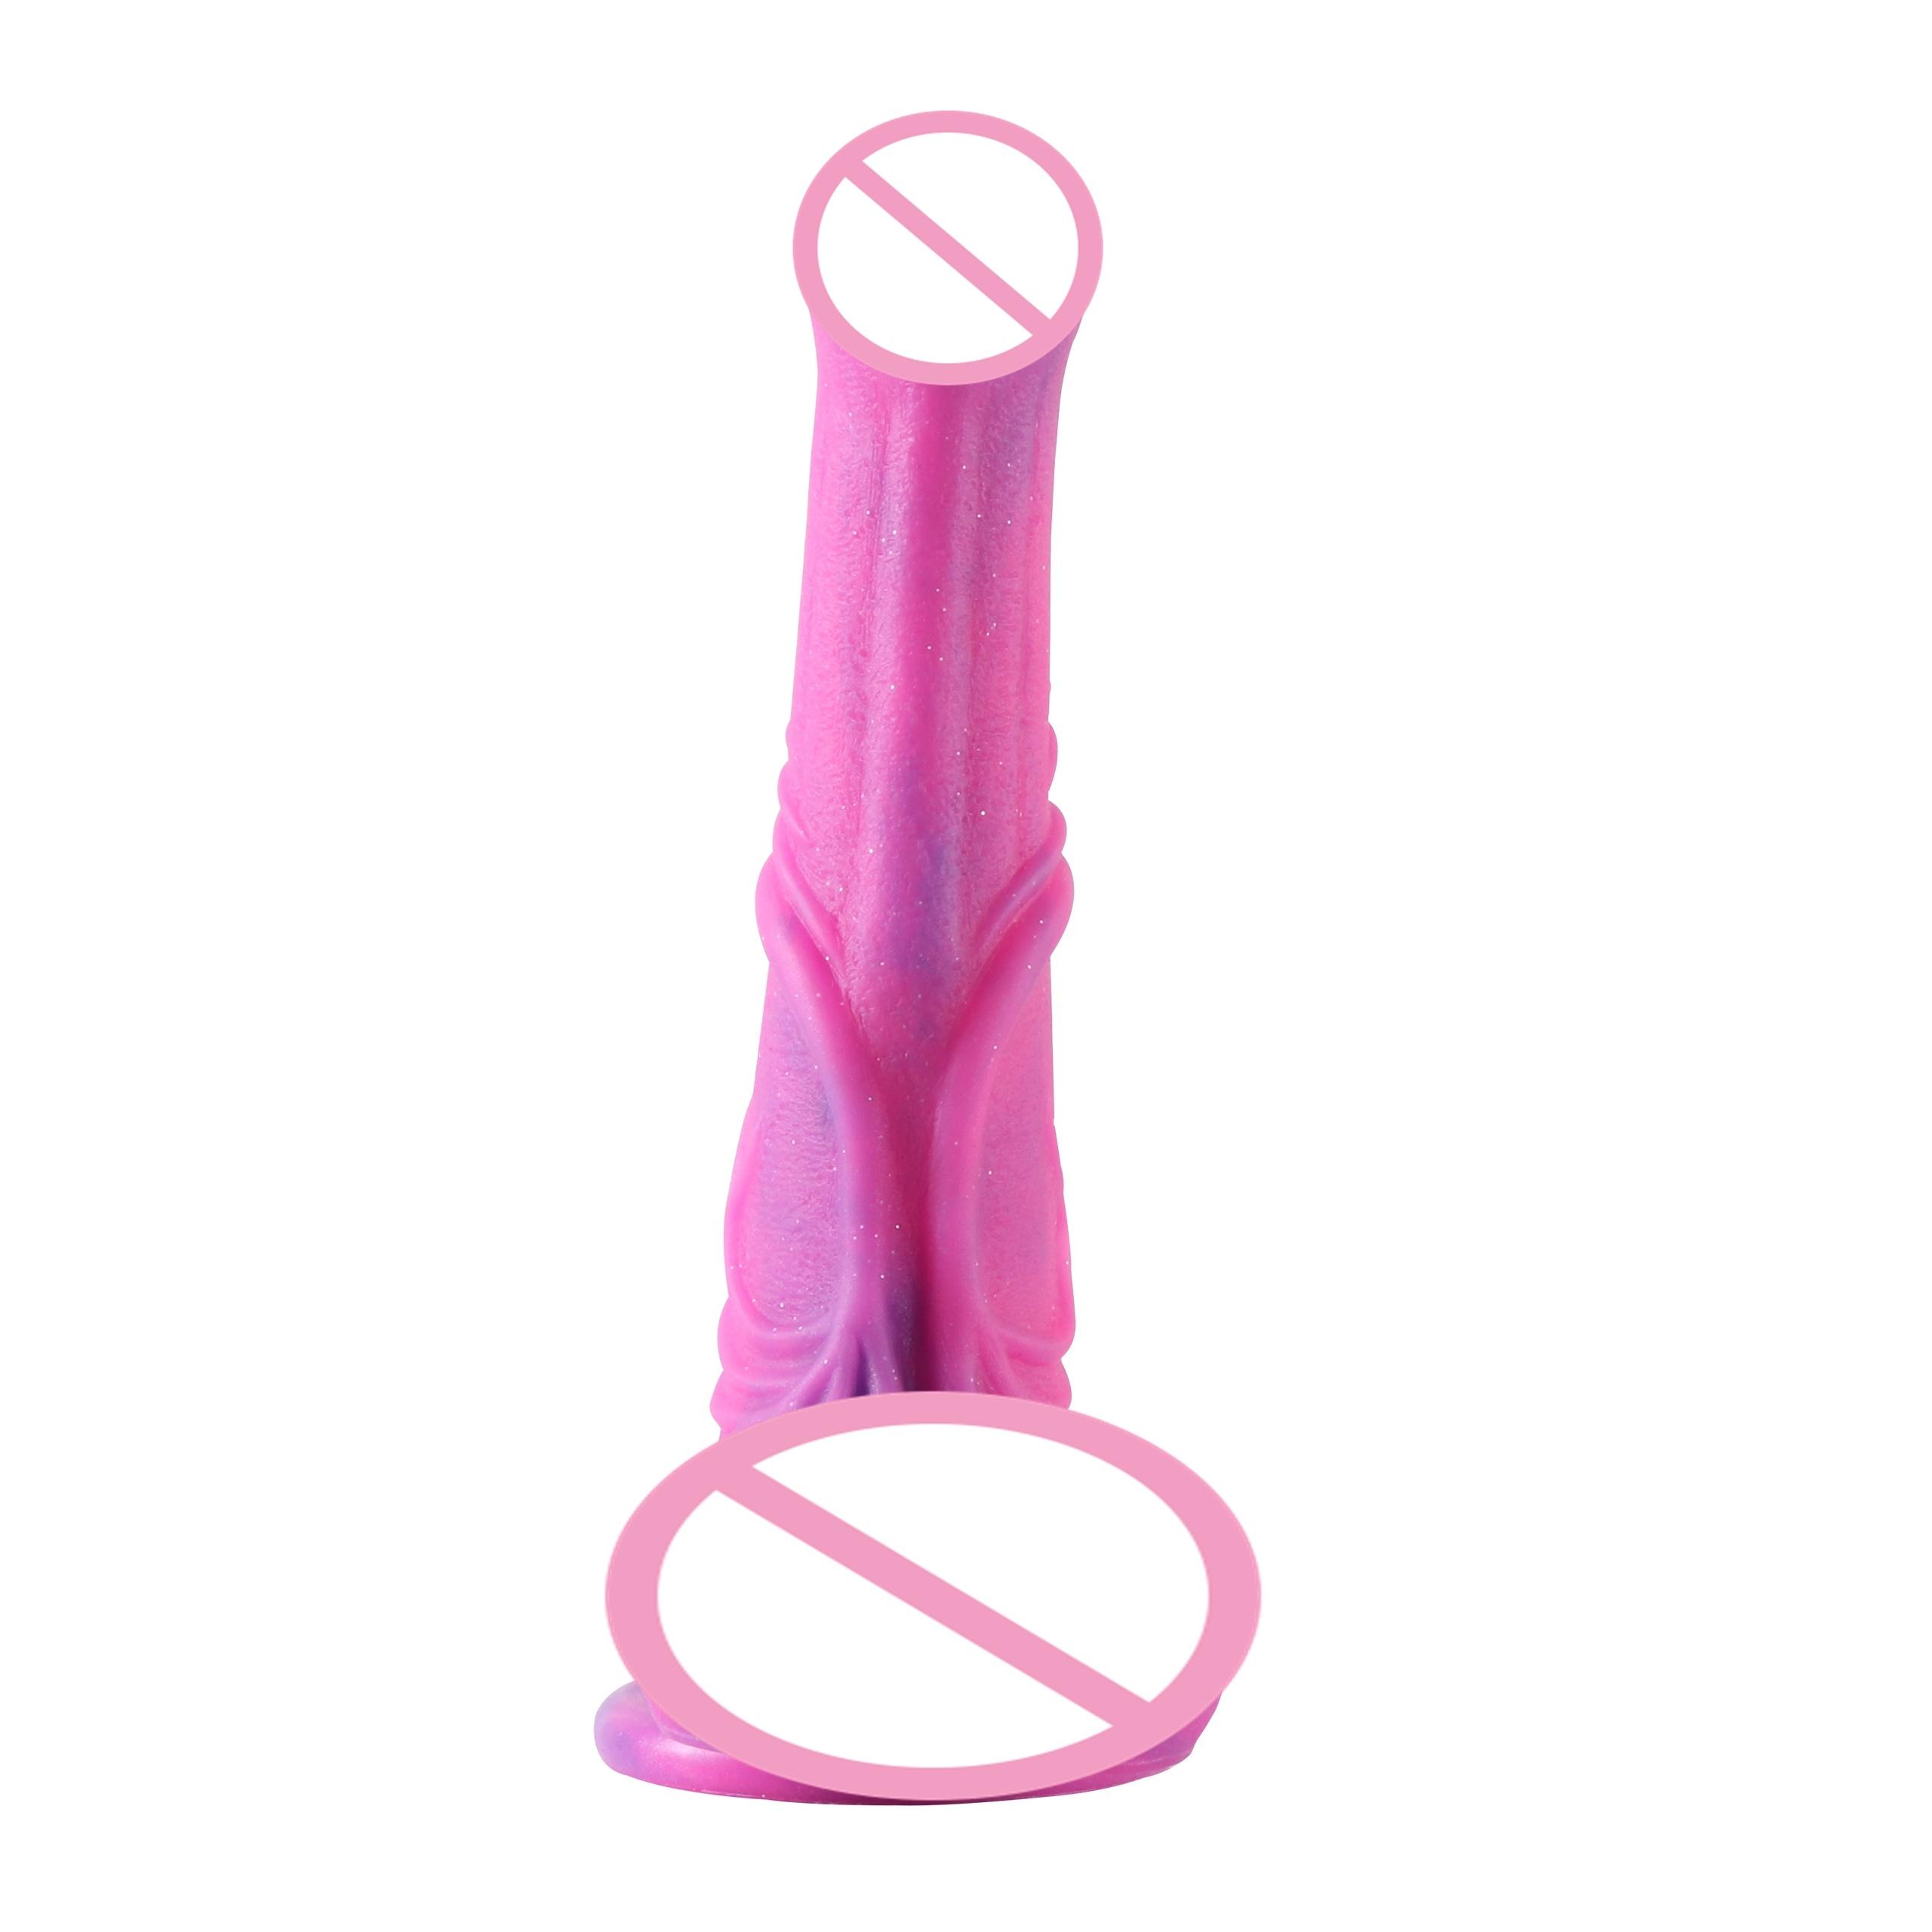  Unconventional Dildo Cool Penis Bright Pink Color For Lustful Masturbation Hands-free Play